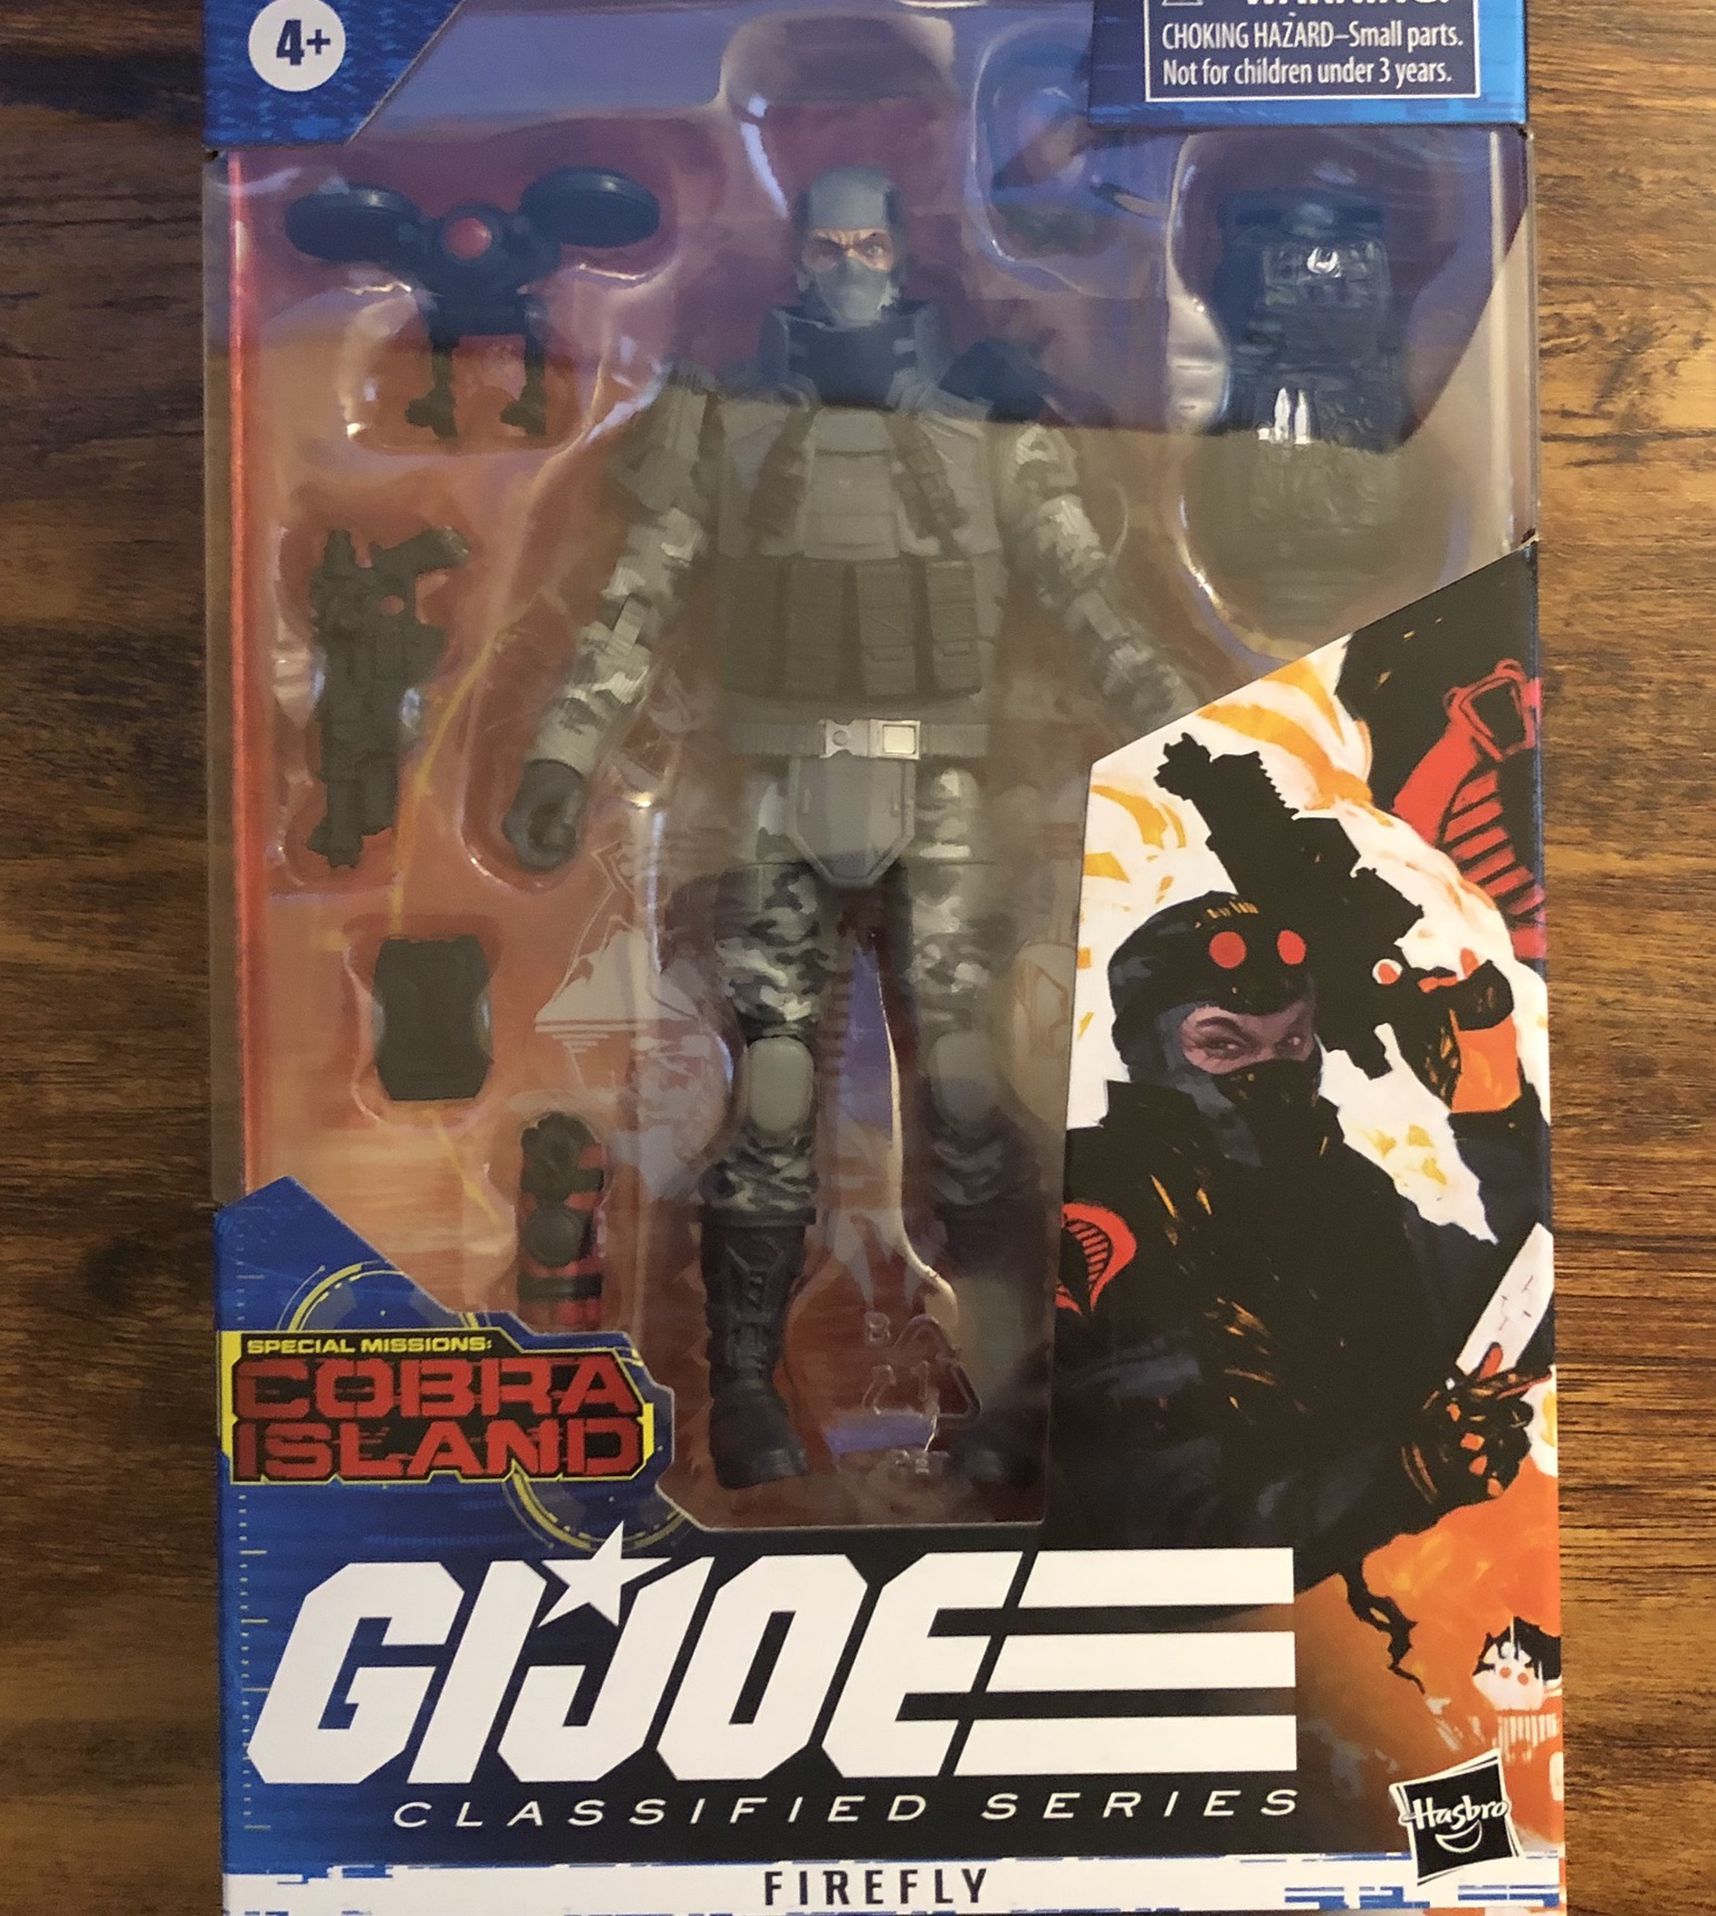 GI Joe Classified Series Special Missions Cobra Island Firefly Target Exclusive